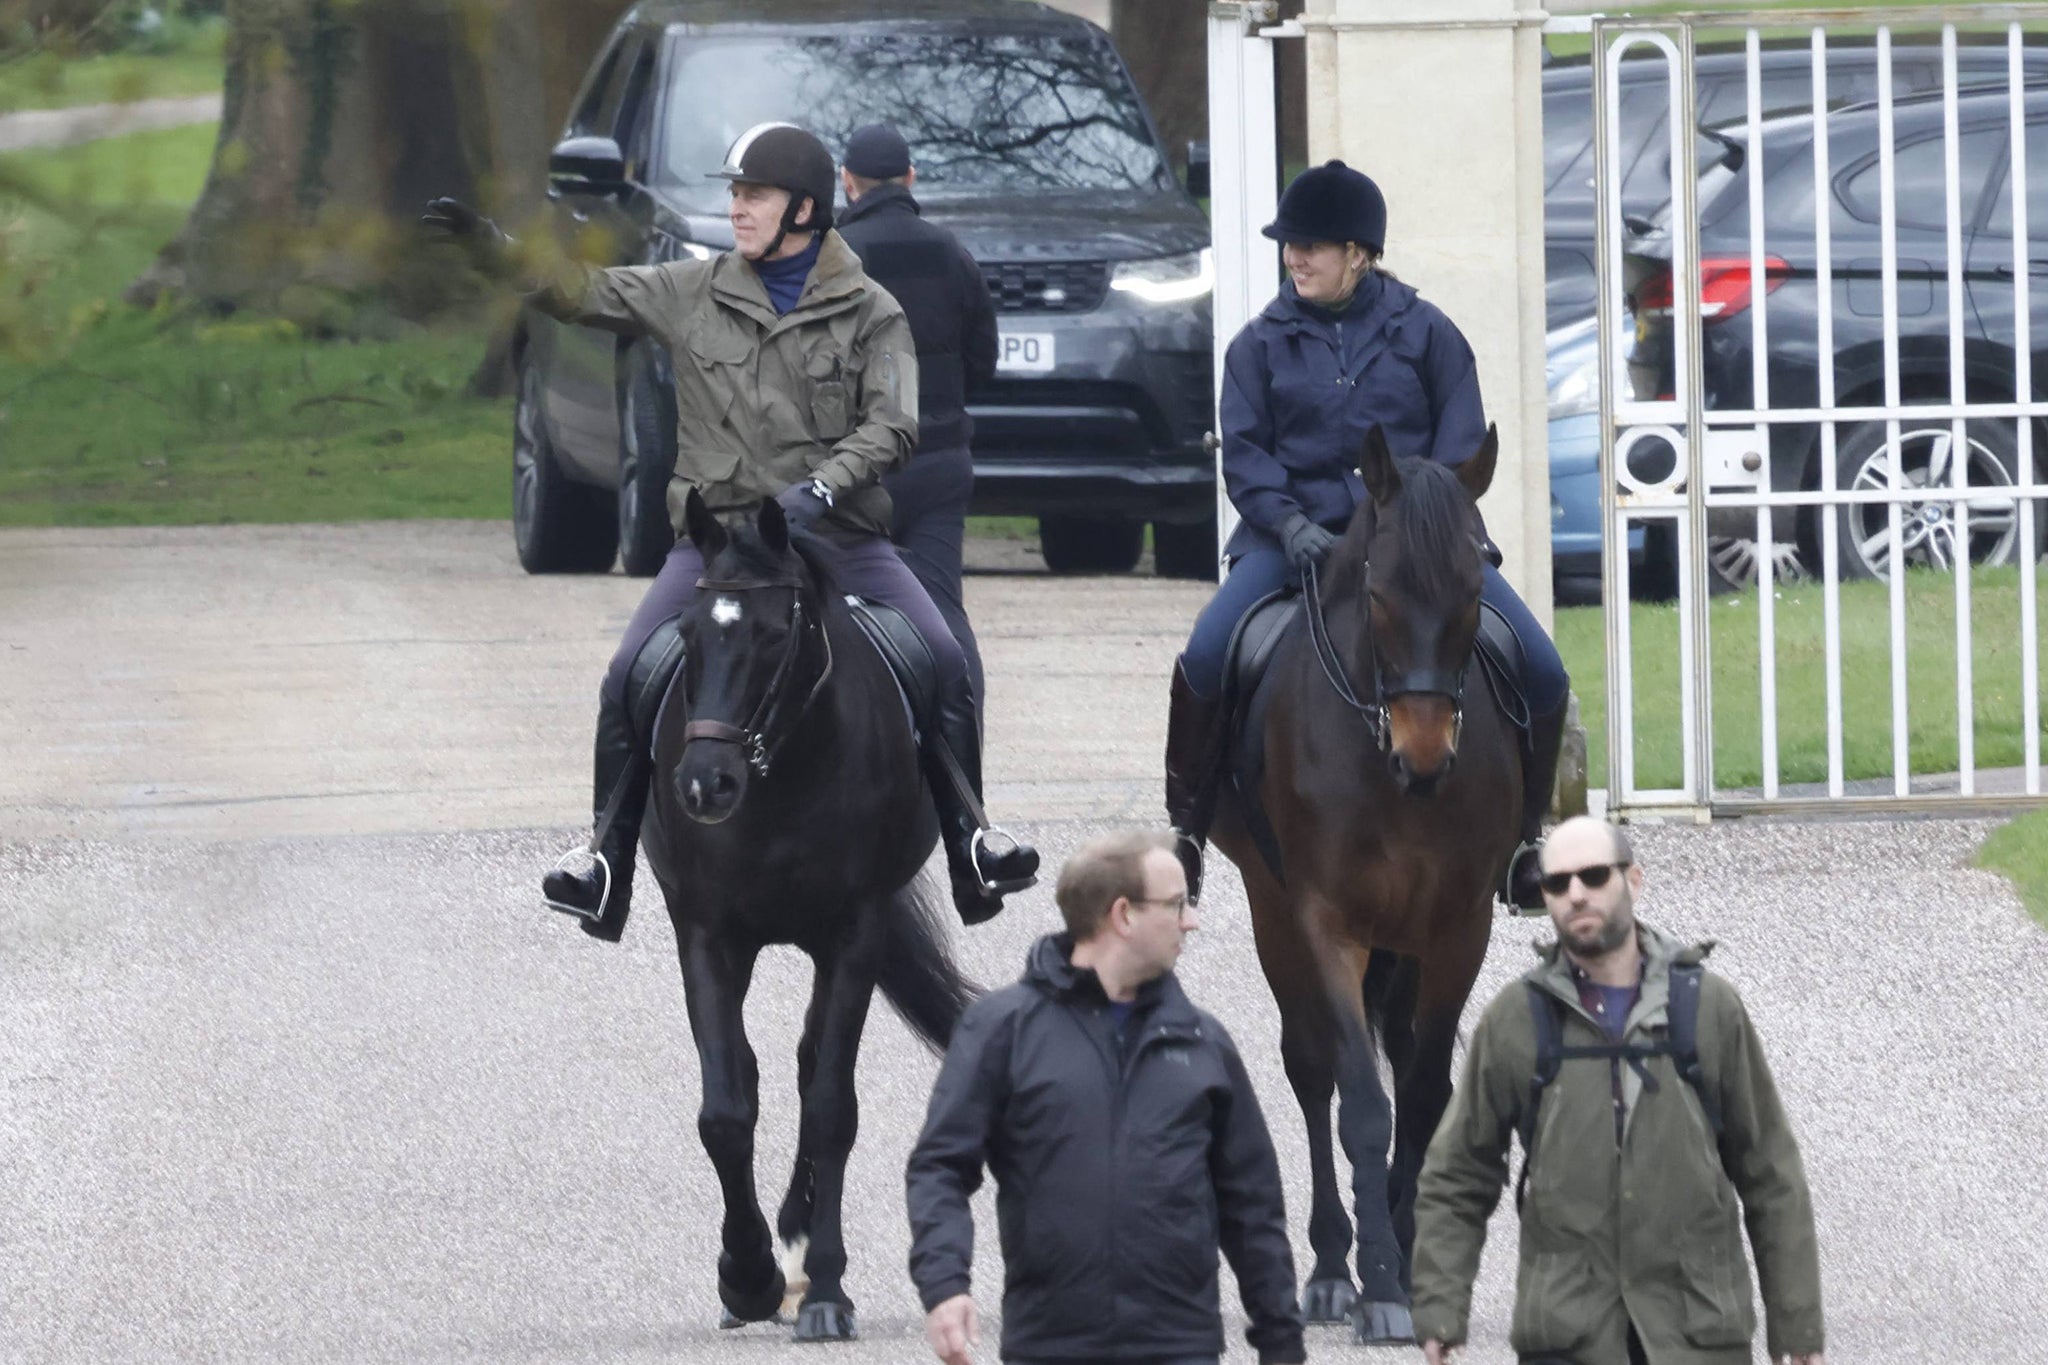 Prince Andrew was spotted riding a horse on the day a Netflix